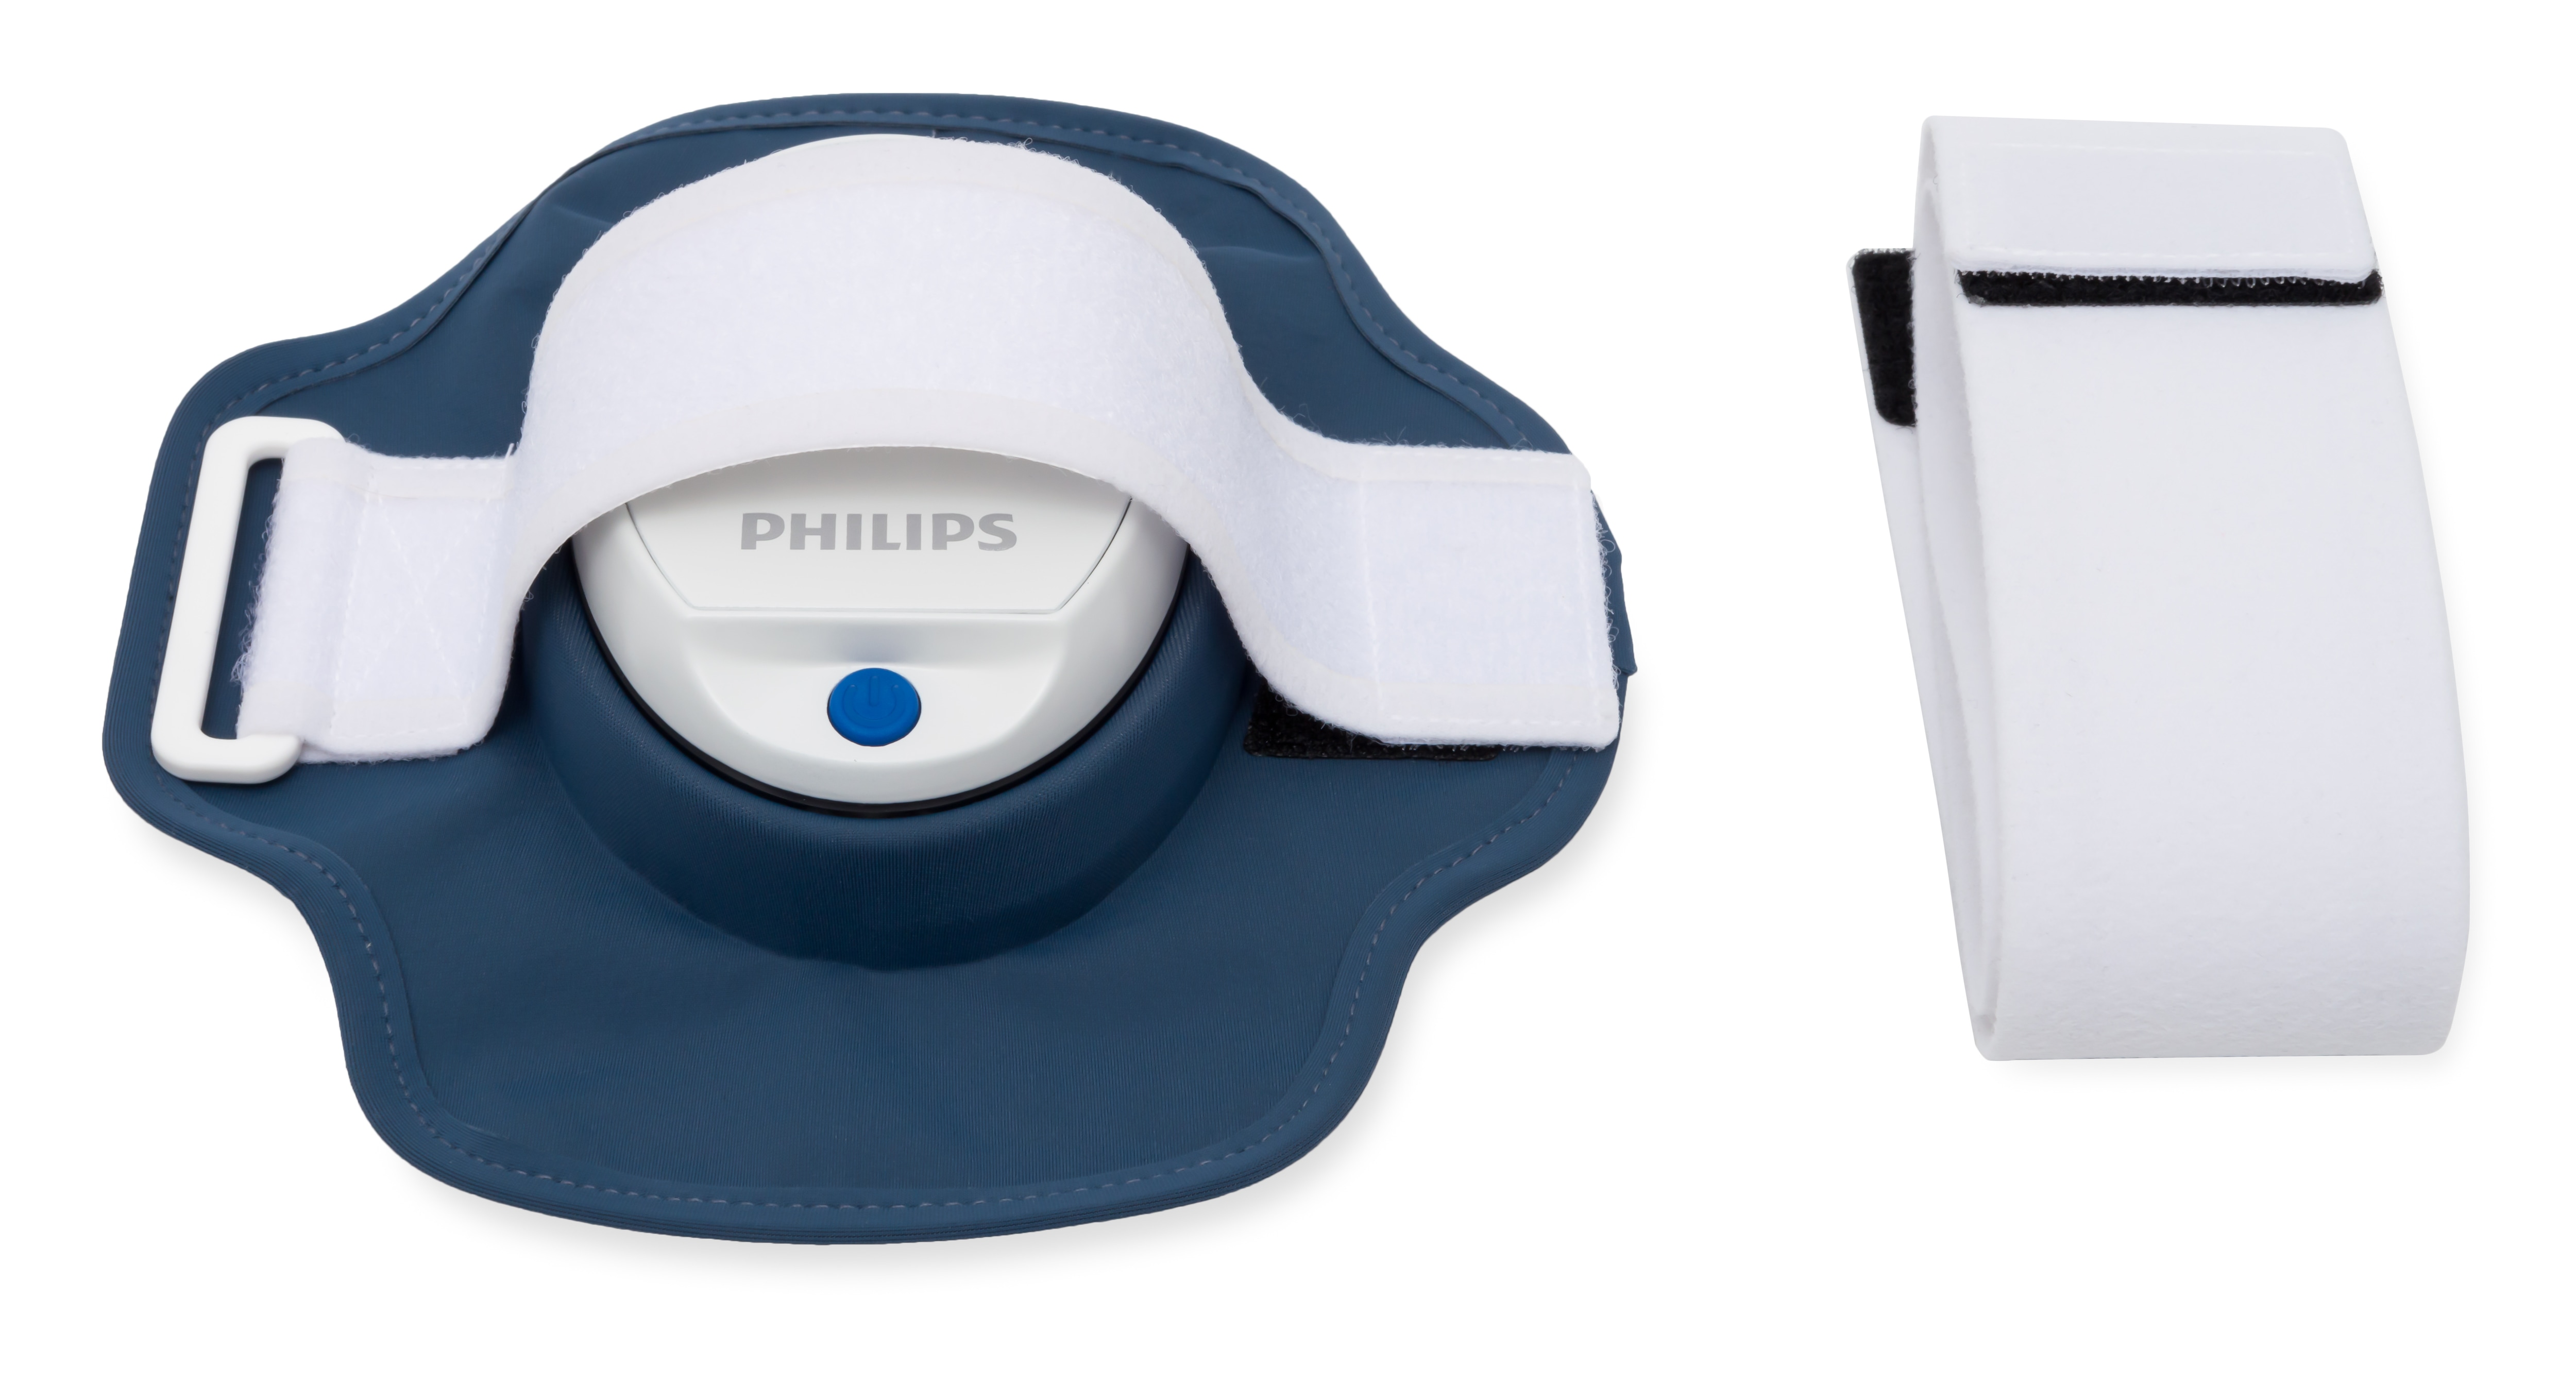 Philips Launches Bluecontrol The Worlds First Wearable Blue Led Light